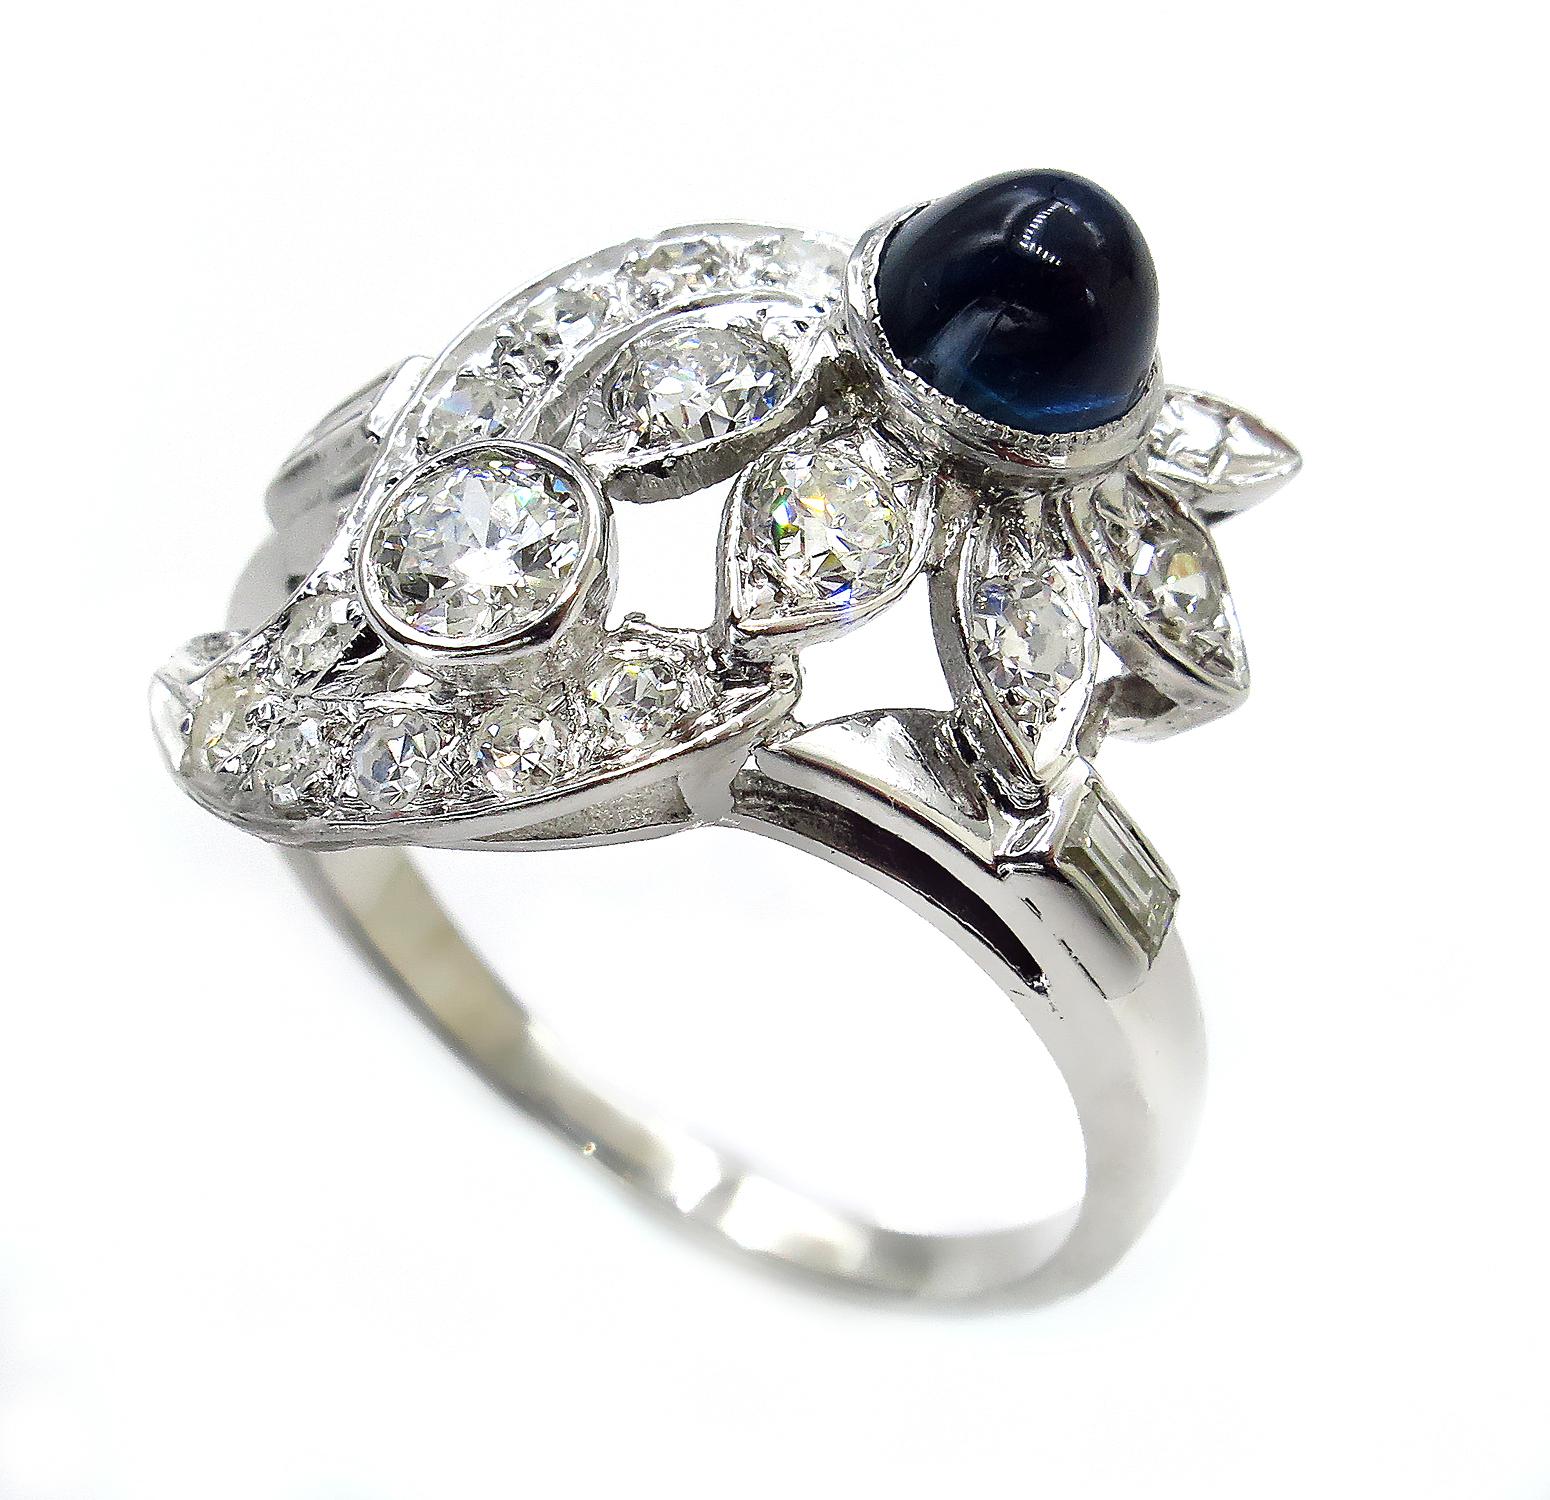 Highly evocative of Golden Age Hollywood Glamour dating from the 1930s, this dynamic dazzler represents a merging of Art Deco and forthcoming 1940s Retro styles. This fabulous free form spray ring, artfully designed multidimensional mounting